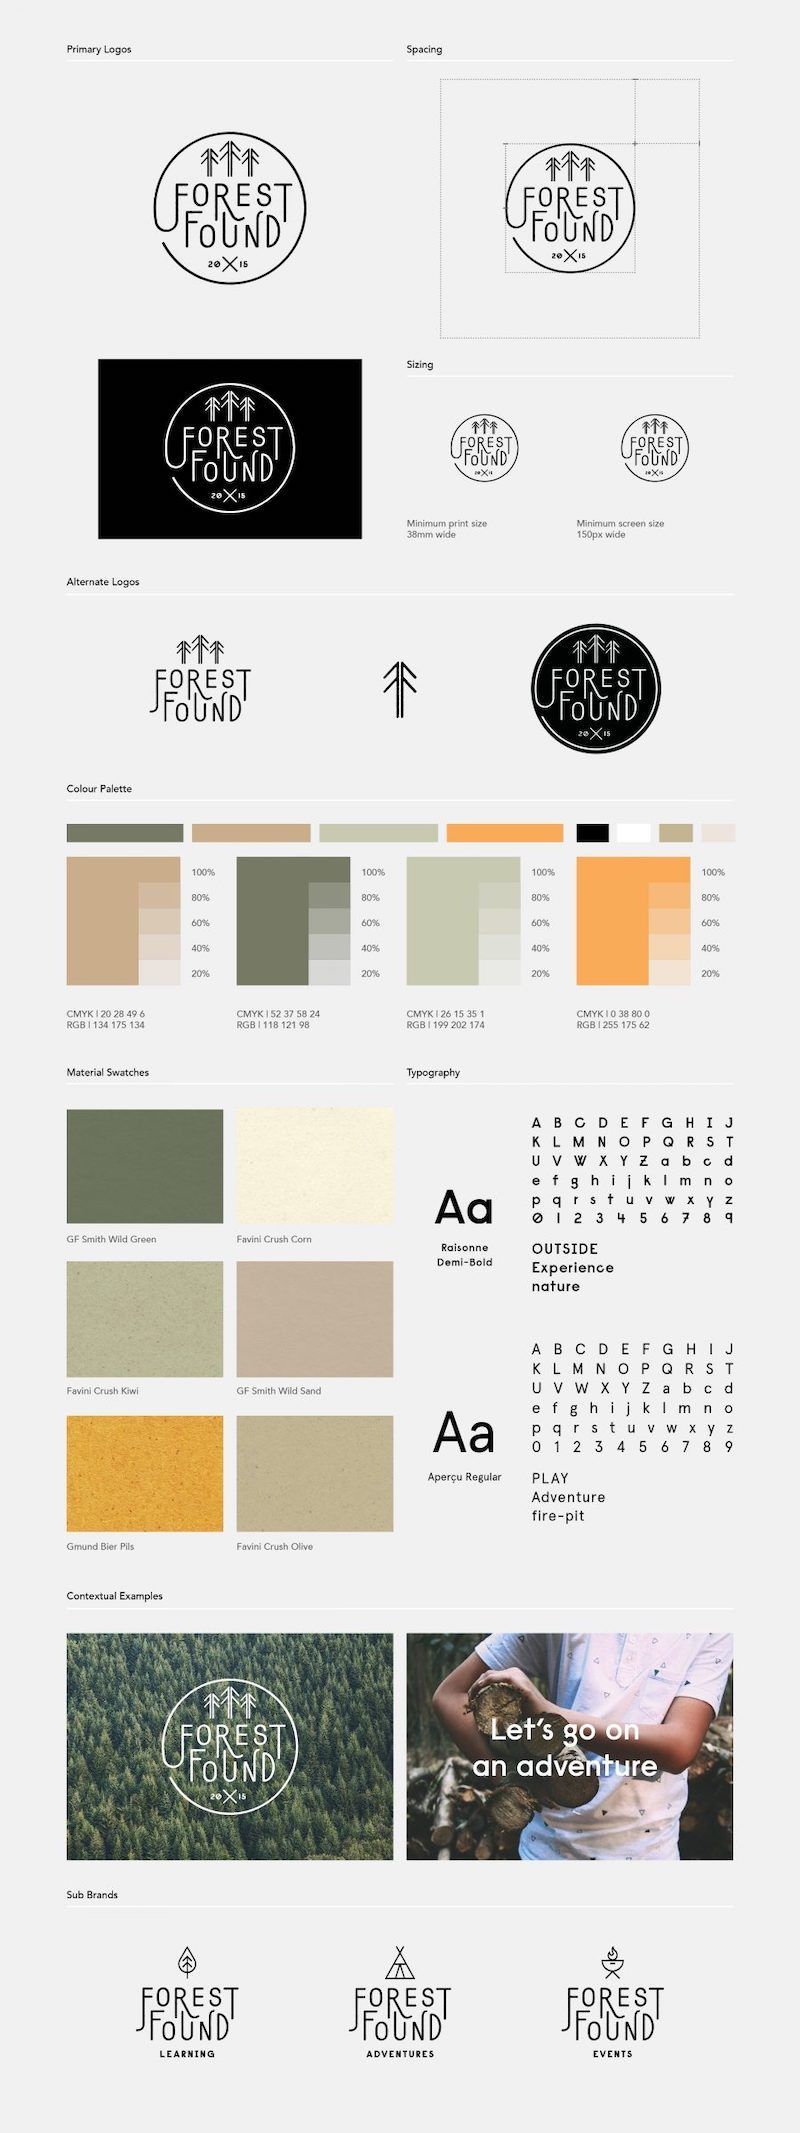 65+ Brand Guidelines Templates, Examples & Tips For Consistent Branding - Venngage - 65+ Brand Guidelines Templates, Examples & Tips For Consistent Branding - Venngage -   19 graphic style Guides ideas